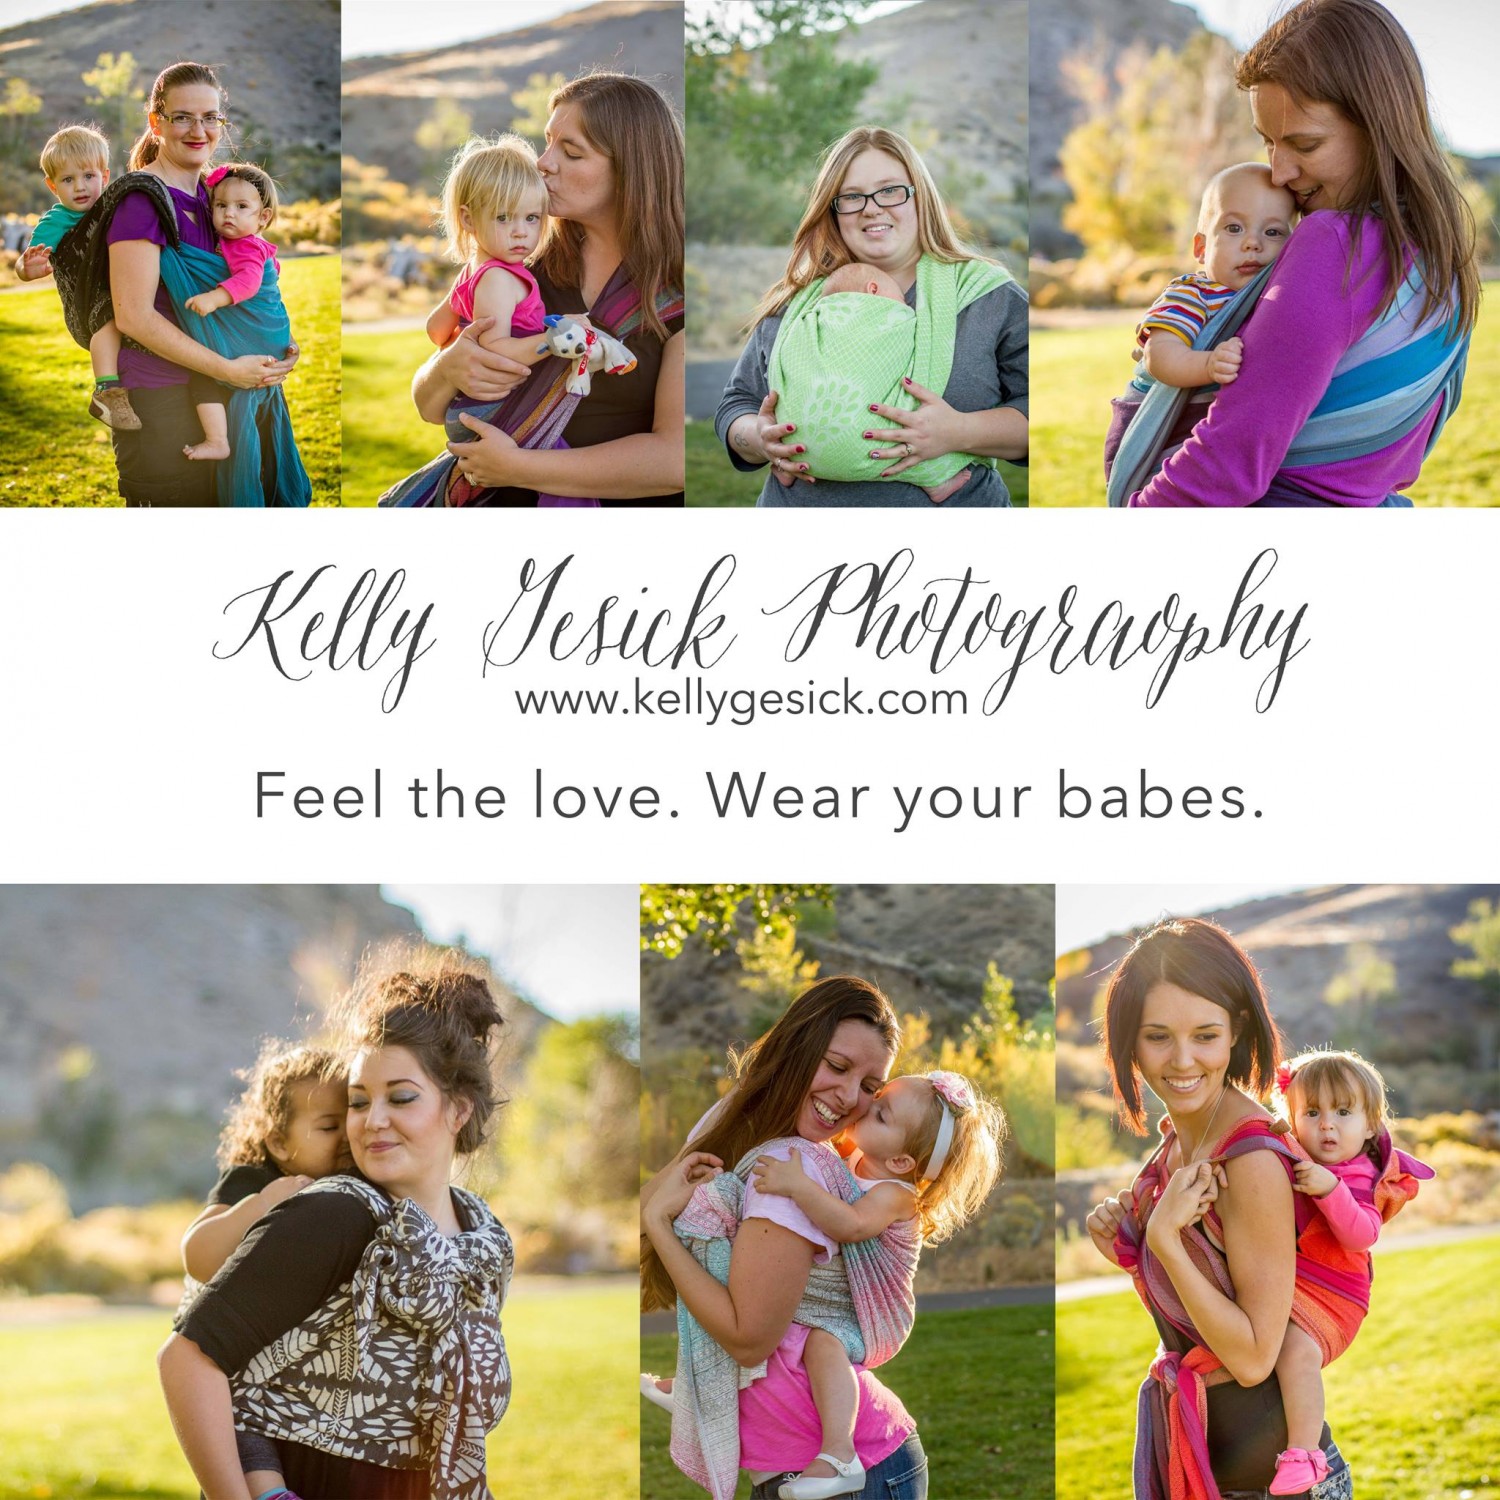 Wear Your Babes- Kelly Gesick Photography